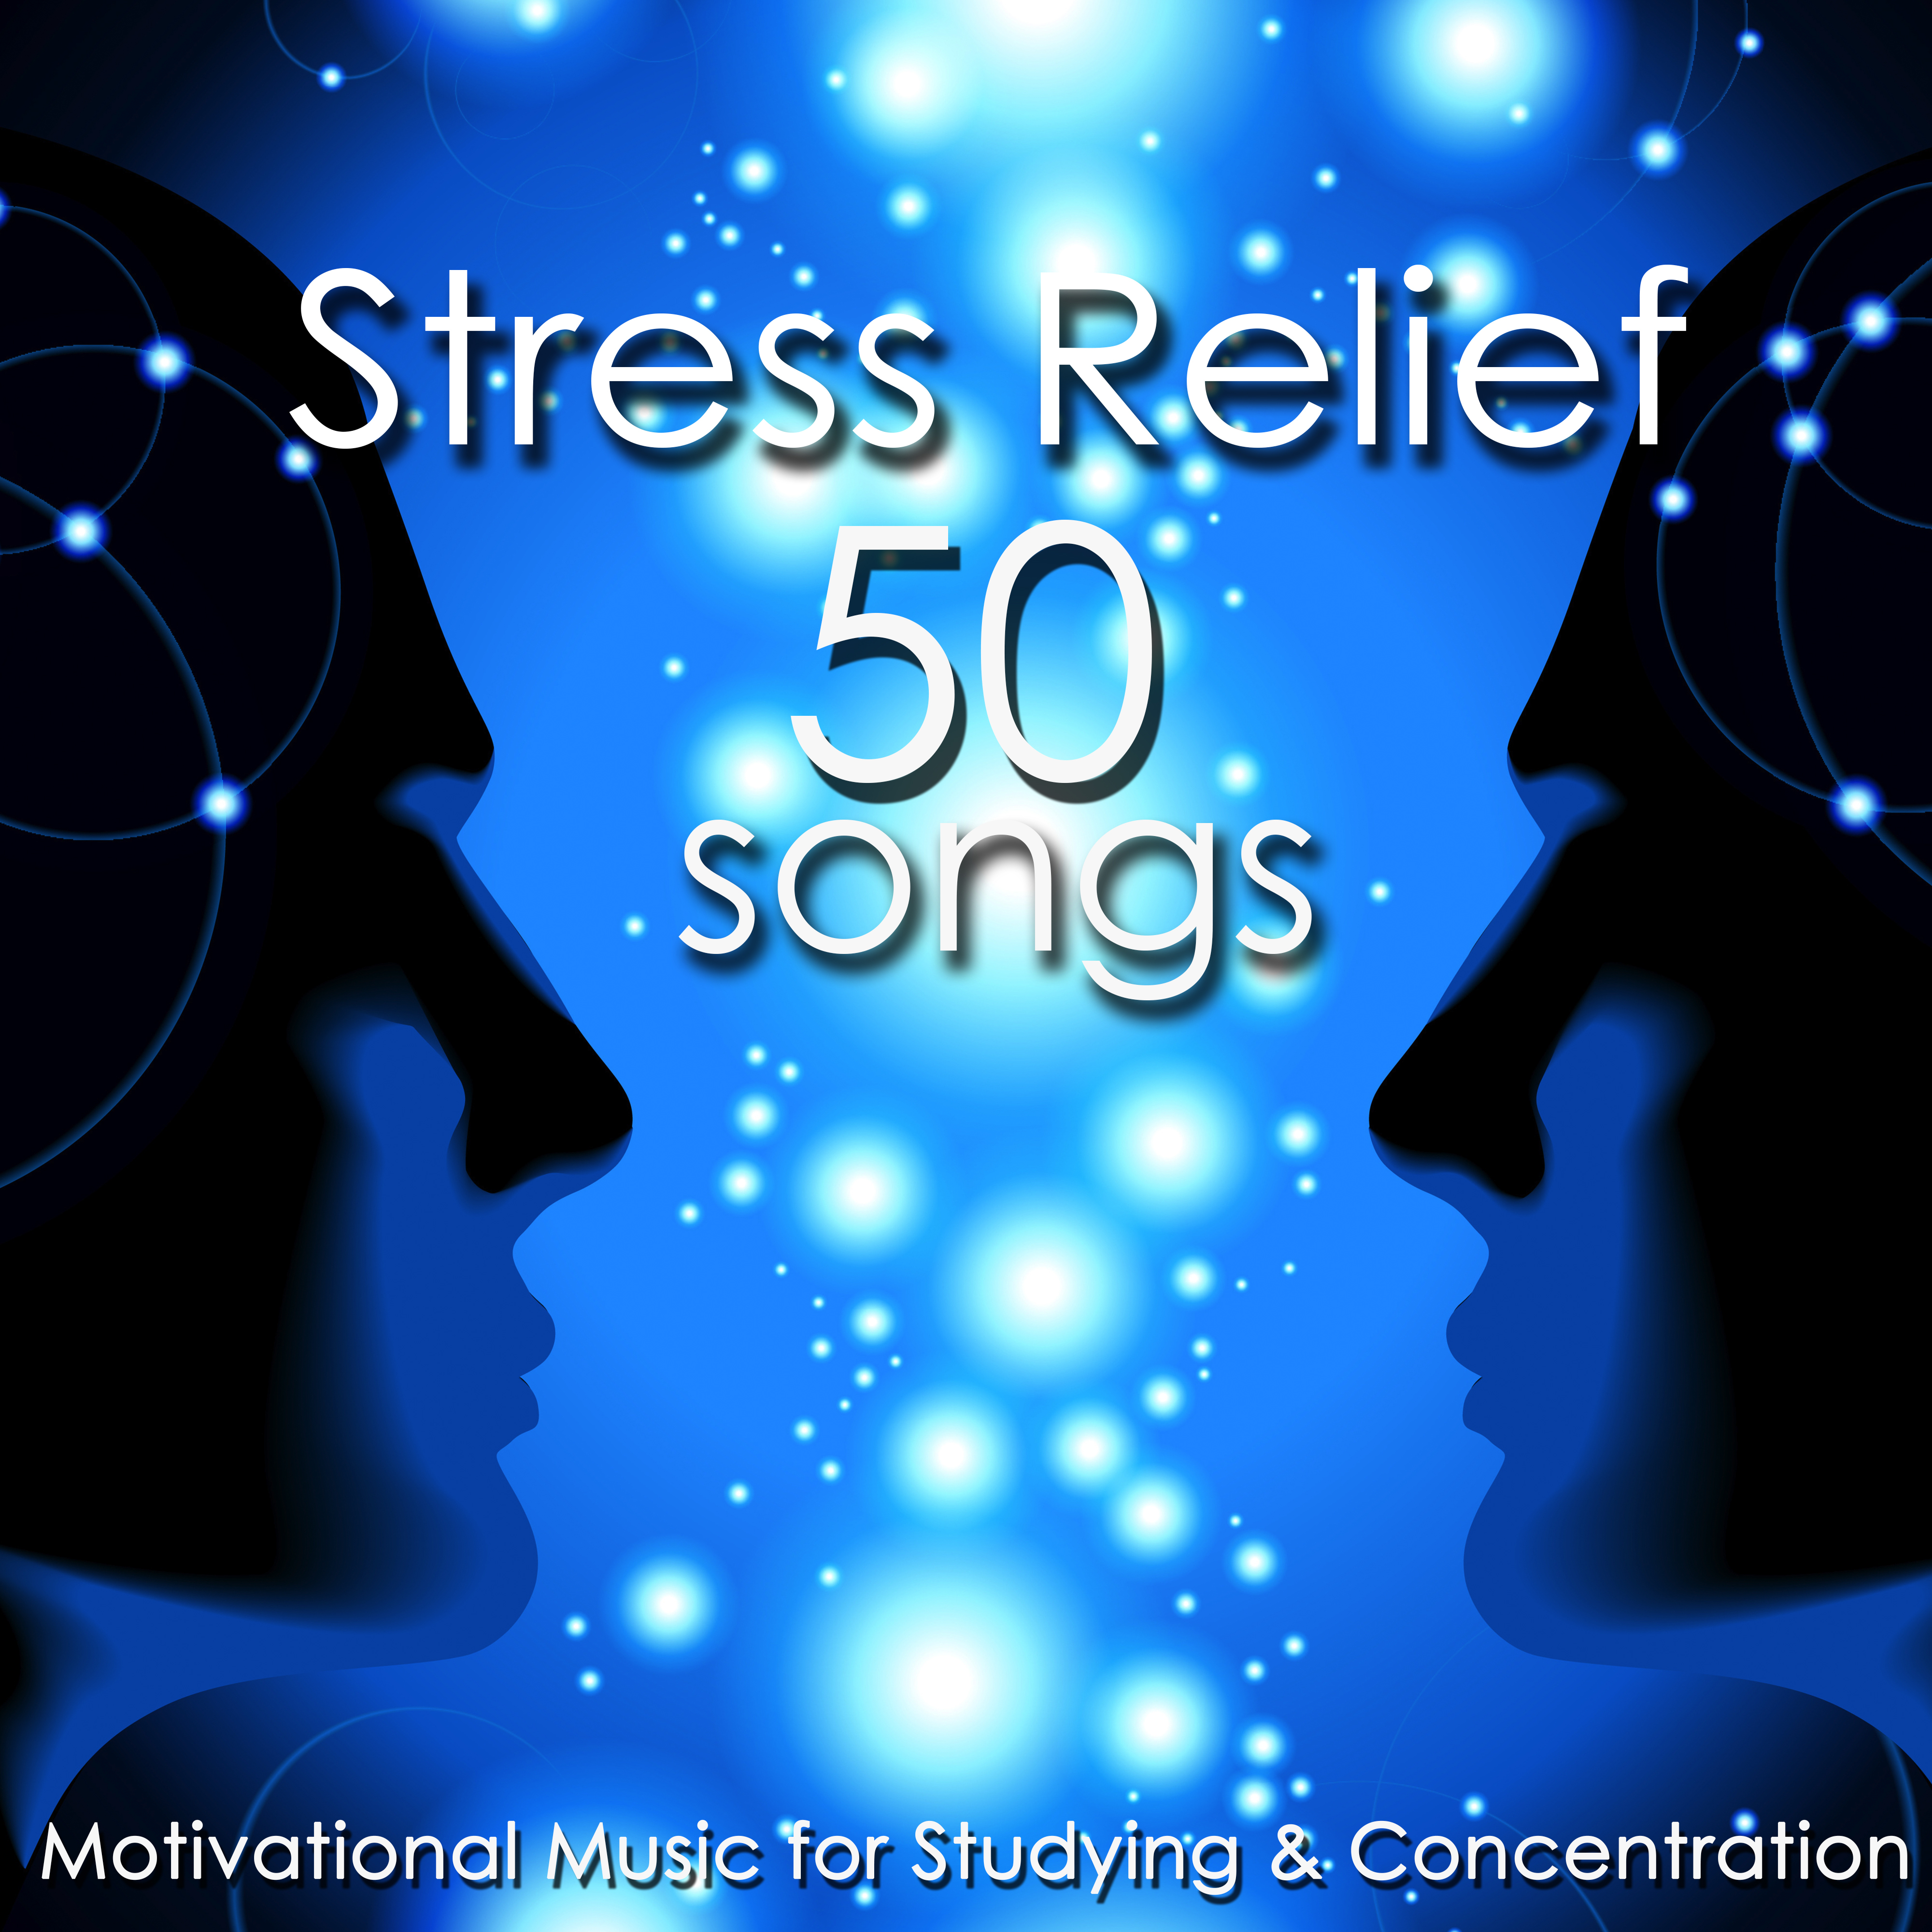 Stress Relief 50 Songs - Brain Training, Motivational Music for Studying & Concentration